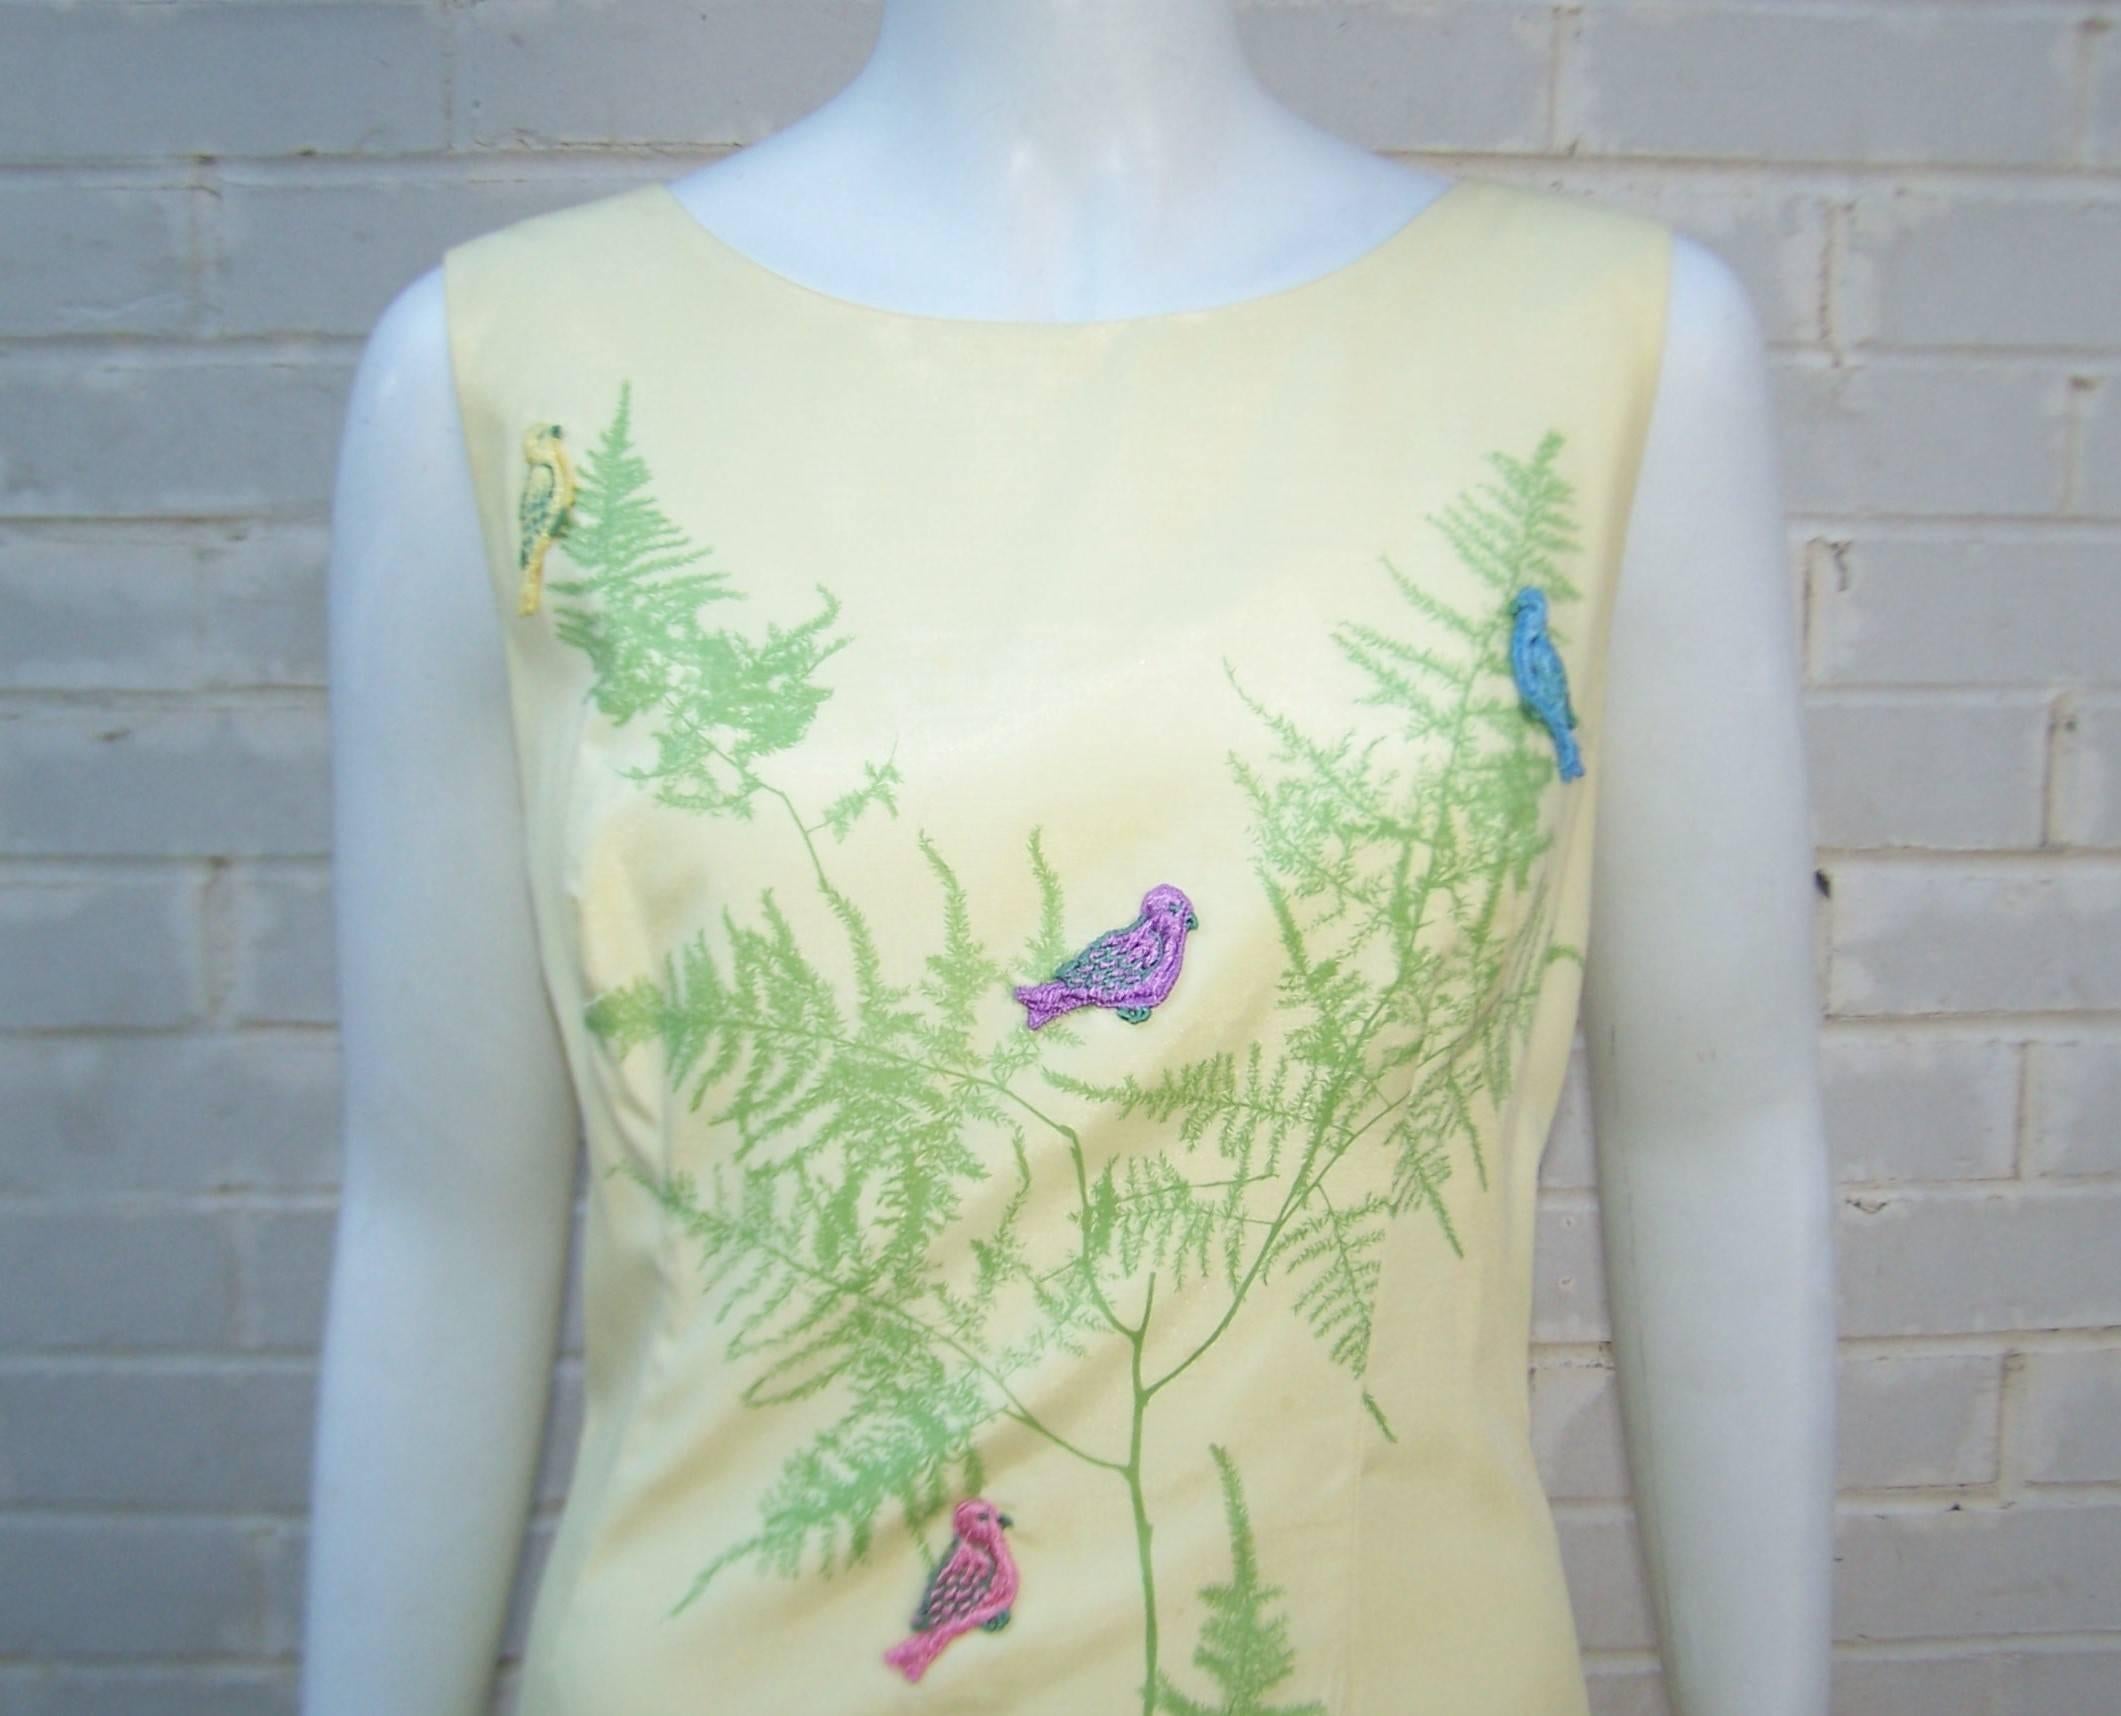 This adorable C.1970 polished cotton dress from the sportswear company, Serbin, is a simple warm weather look with the visual bonus of bird appliques.  The dress zips and hooks at the back with a flattering hourglass silhouette in a buttery yellow